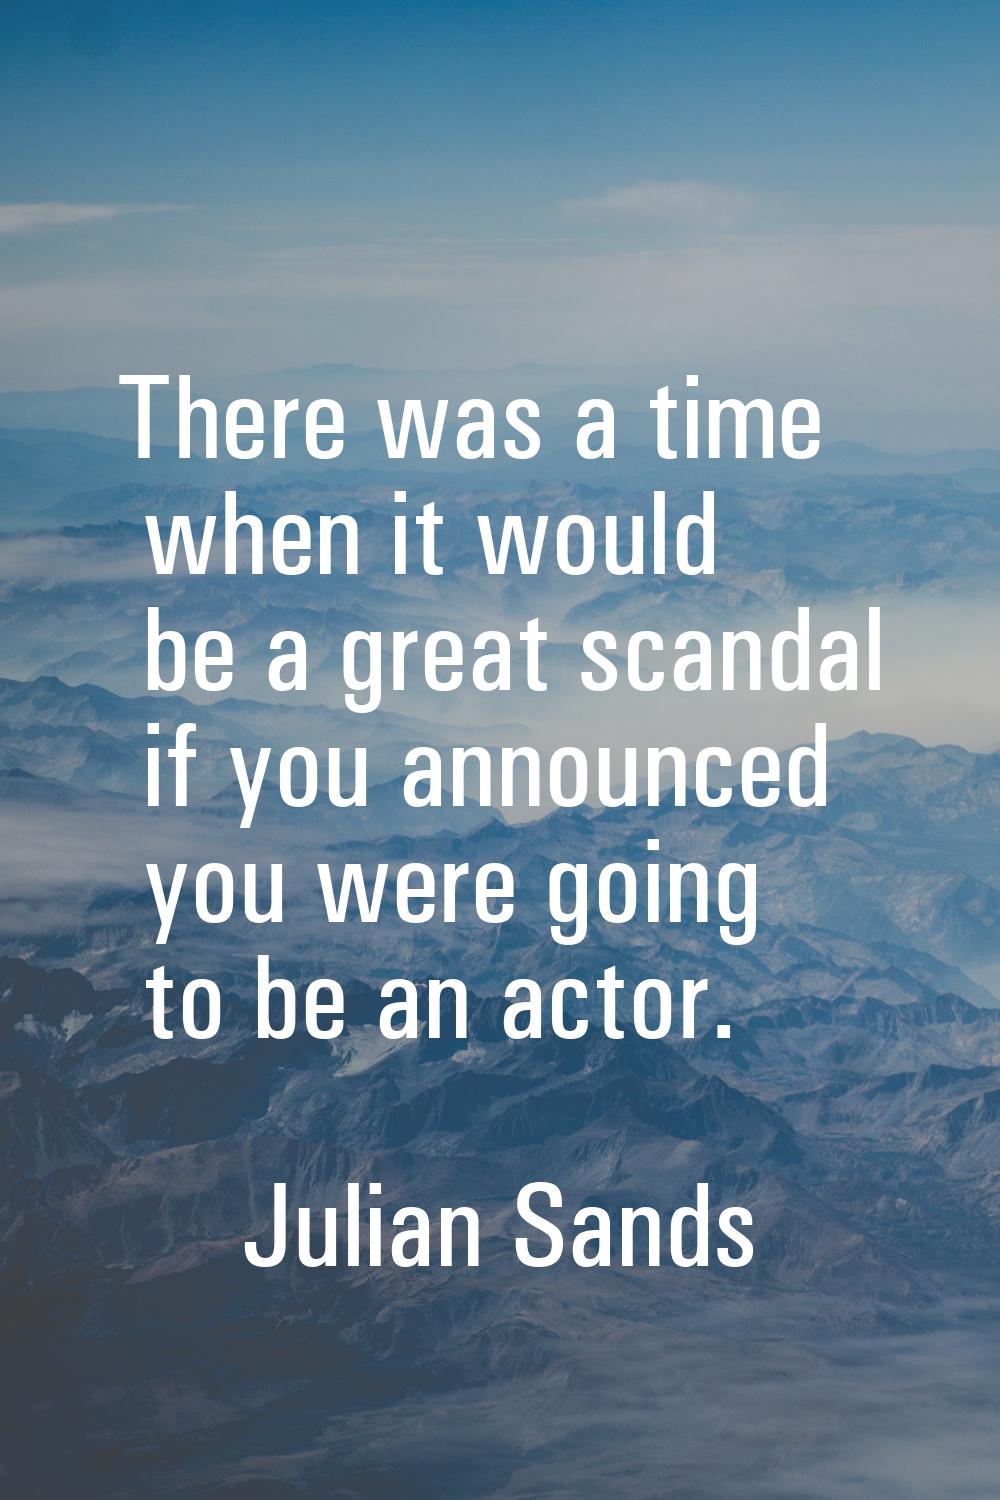 There was a time when it would be a great scandal if you announced you were going to be an actor.